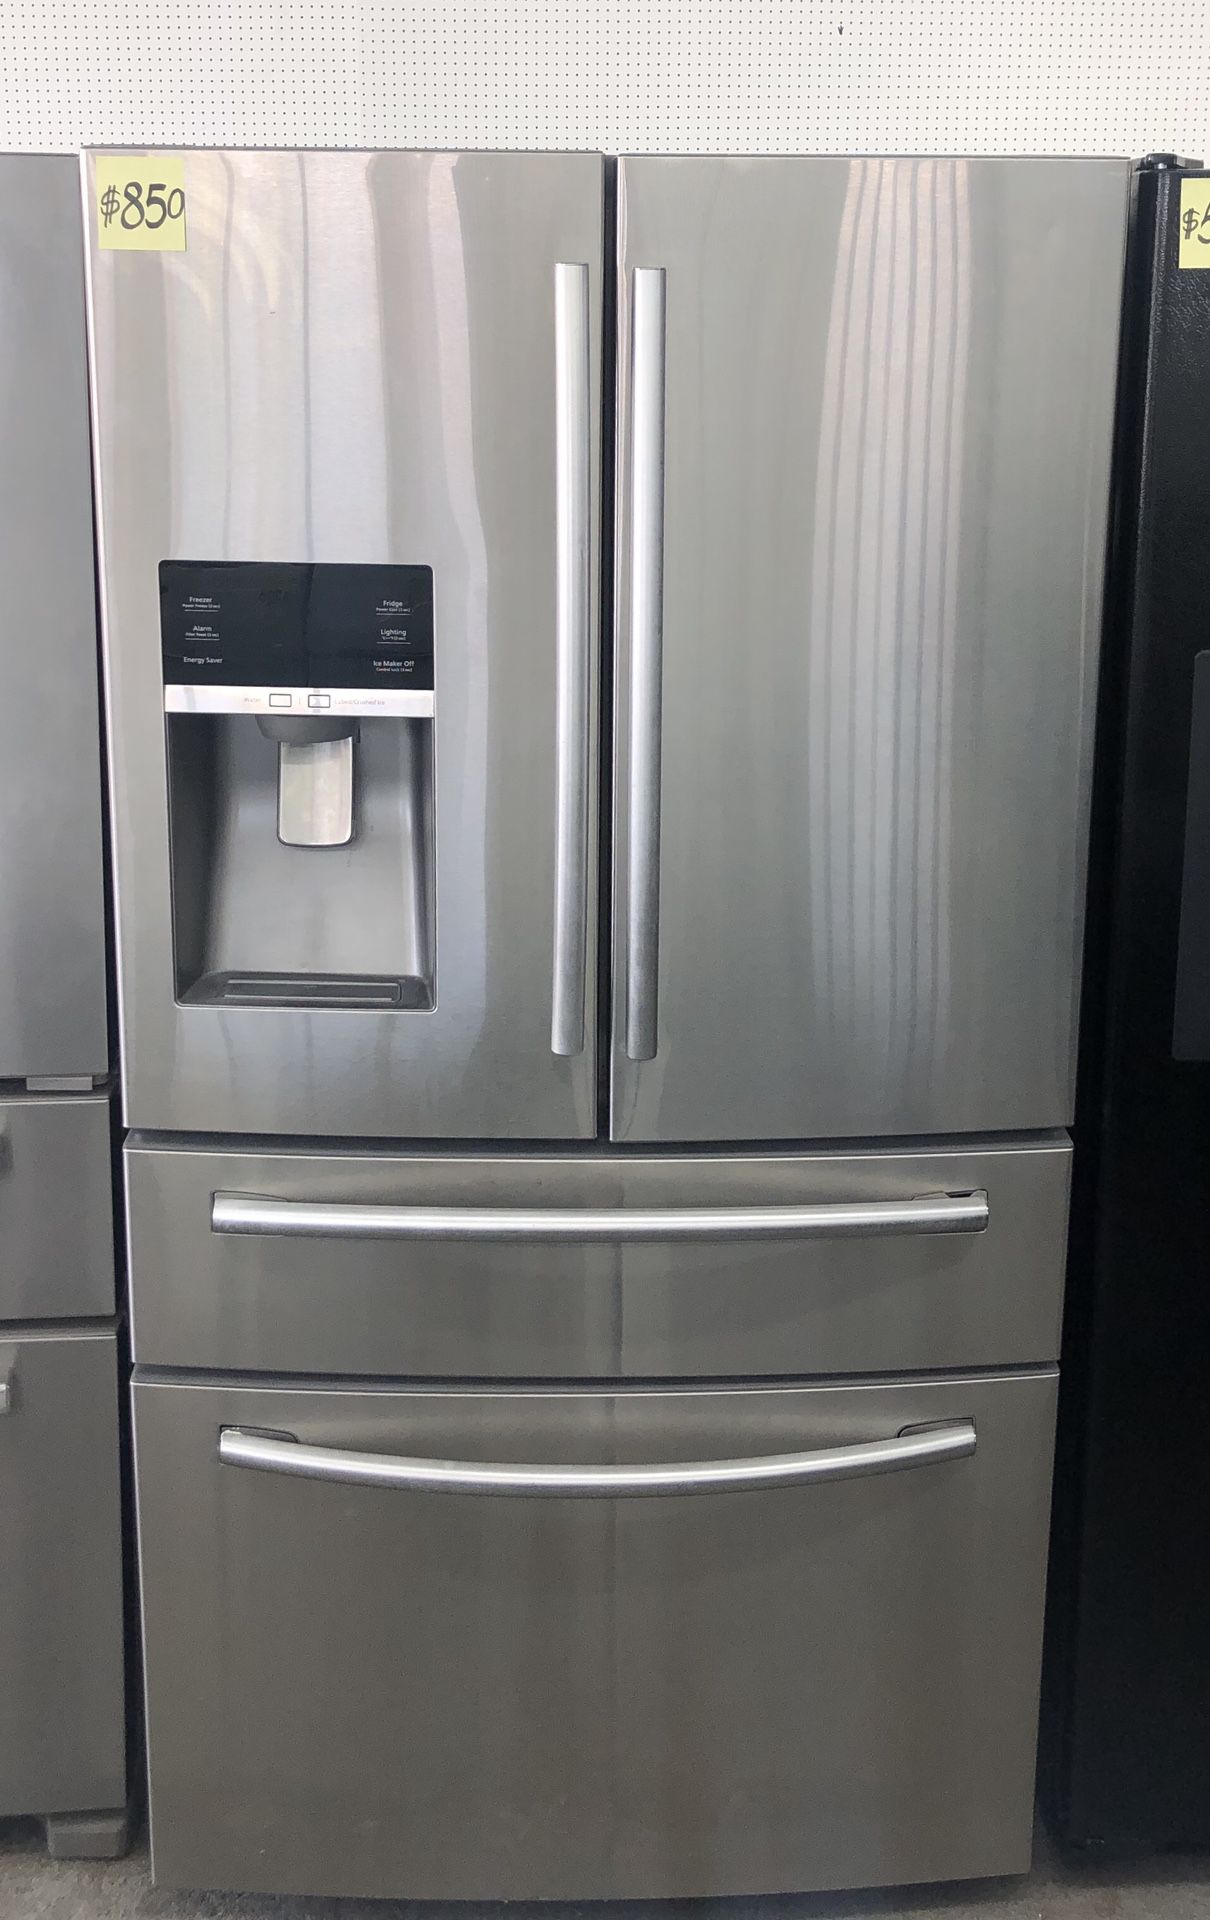 Comes with free 6 Months Warranty-28 cu. ft. Four door stainless steel refrigerator Samsung